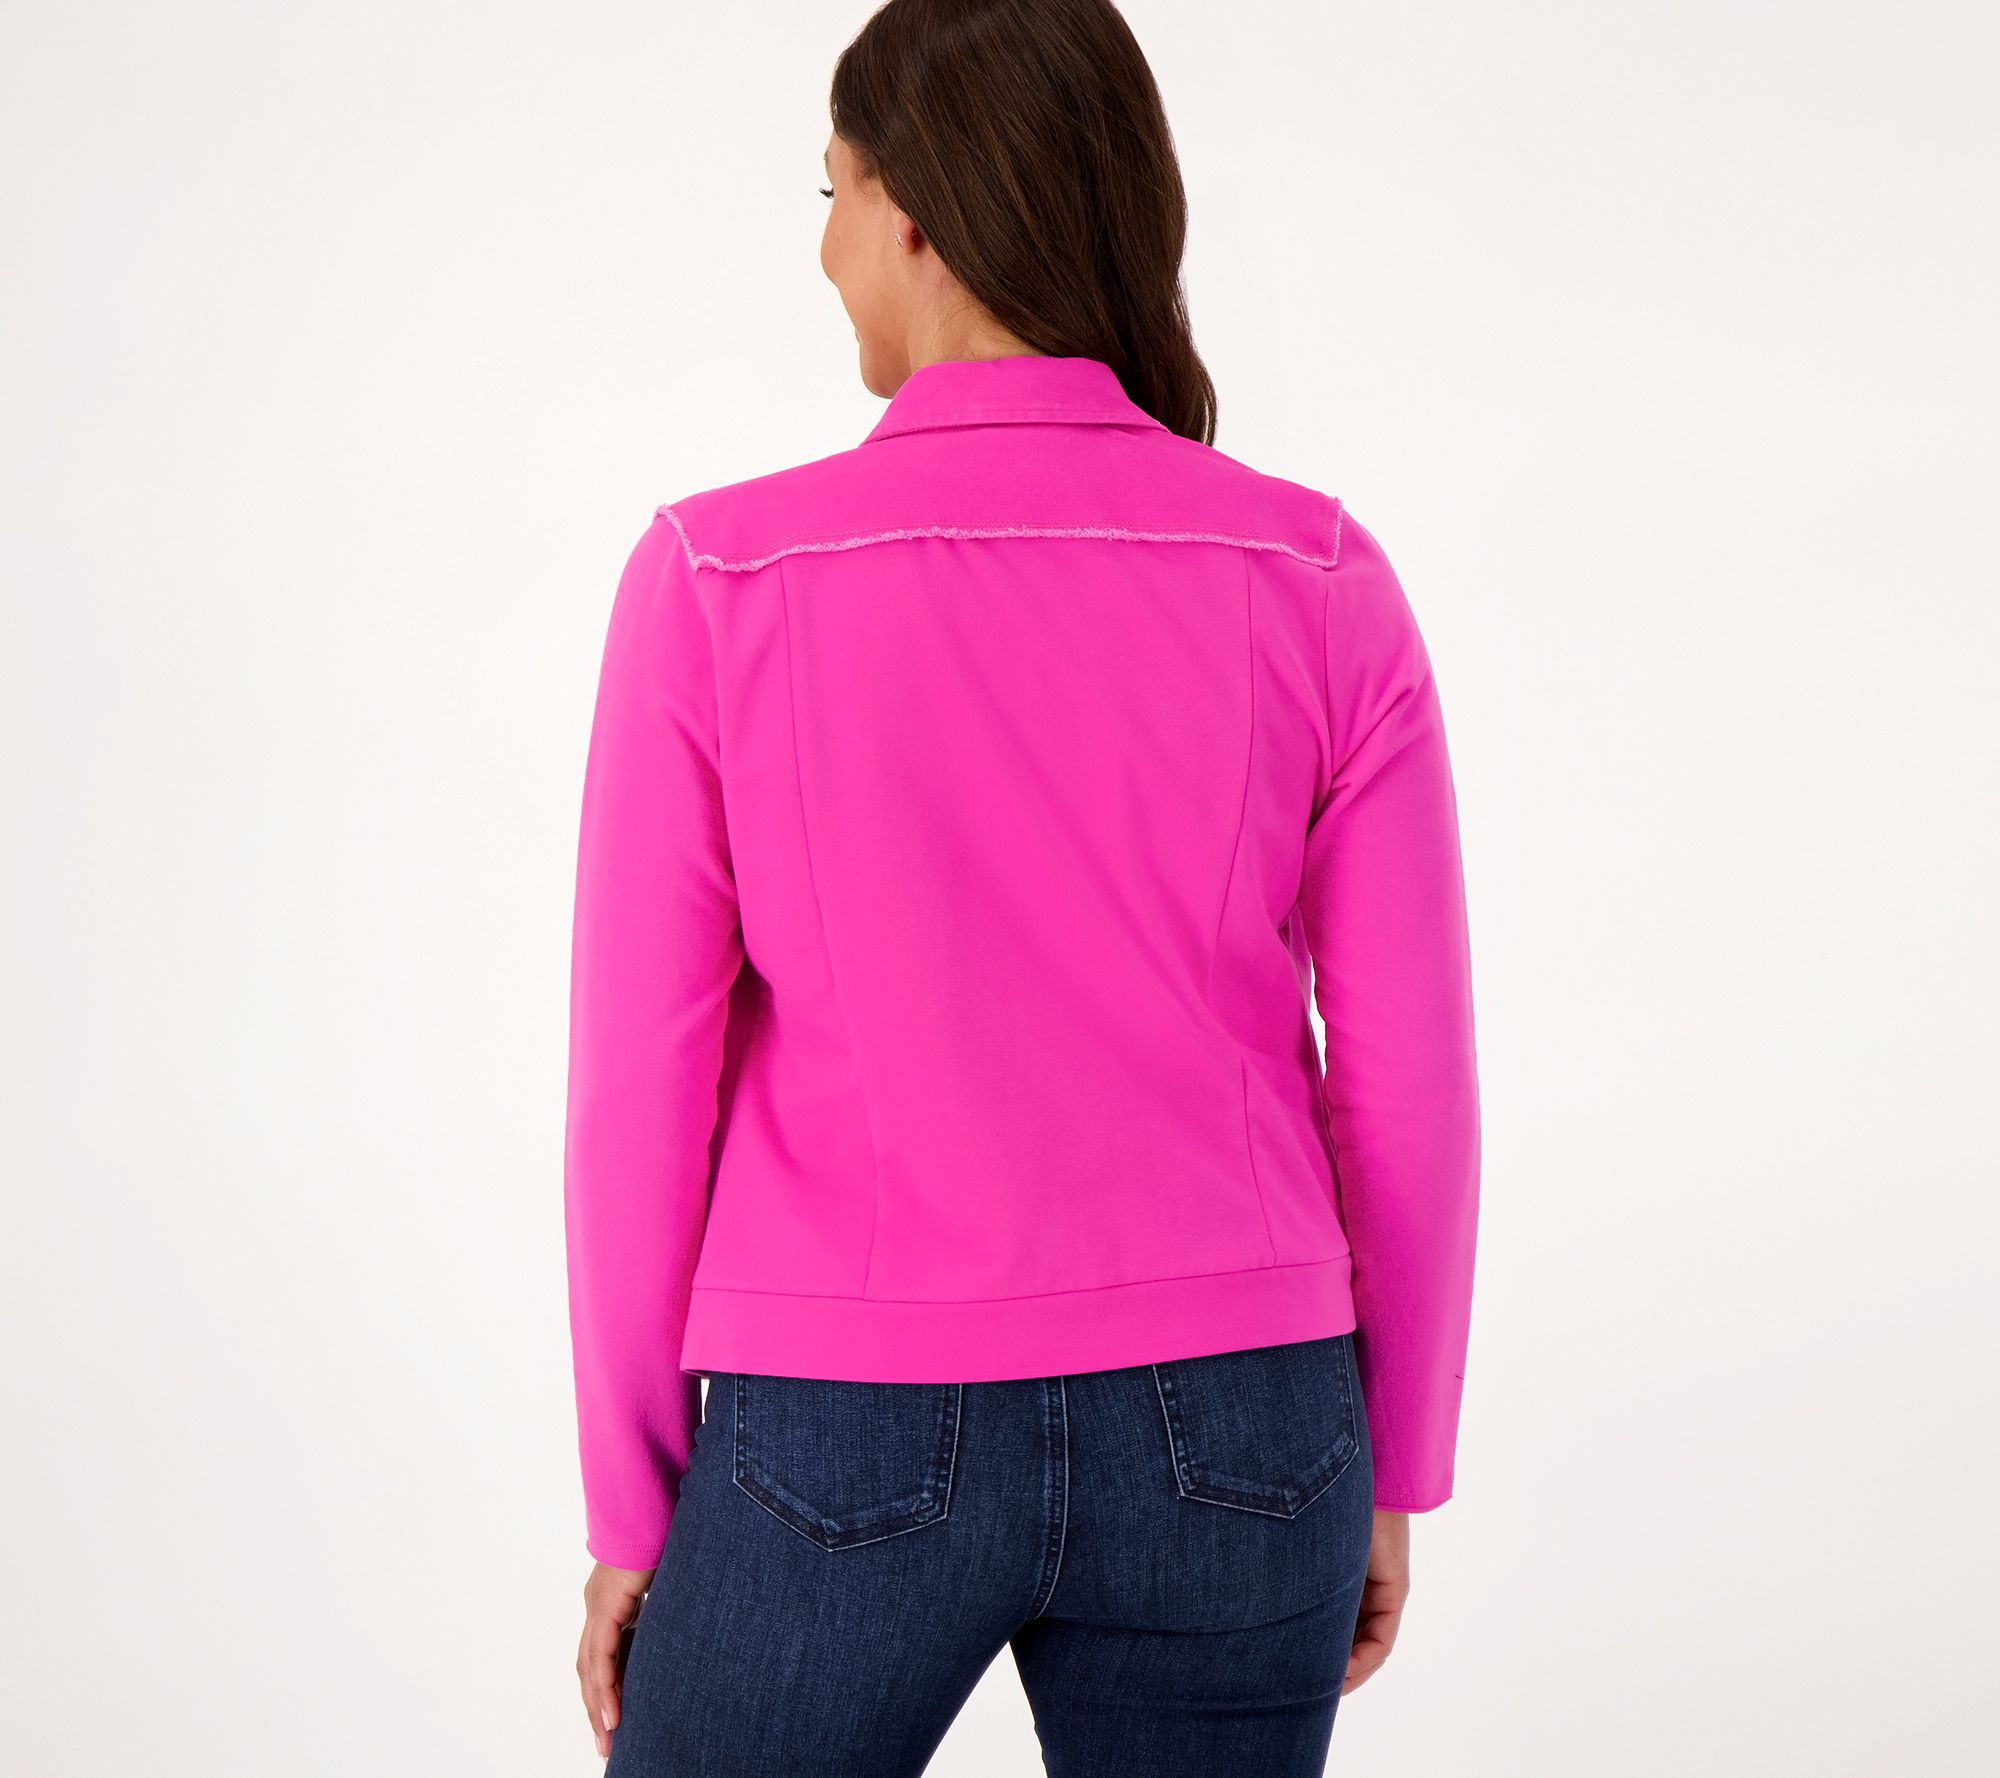 Belle by Kim Gravel Twill Jacket with Knit Back and Sleeves - QVC.com